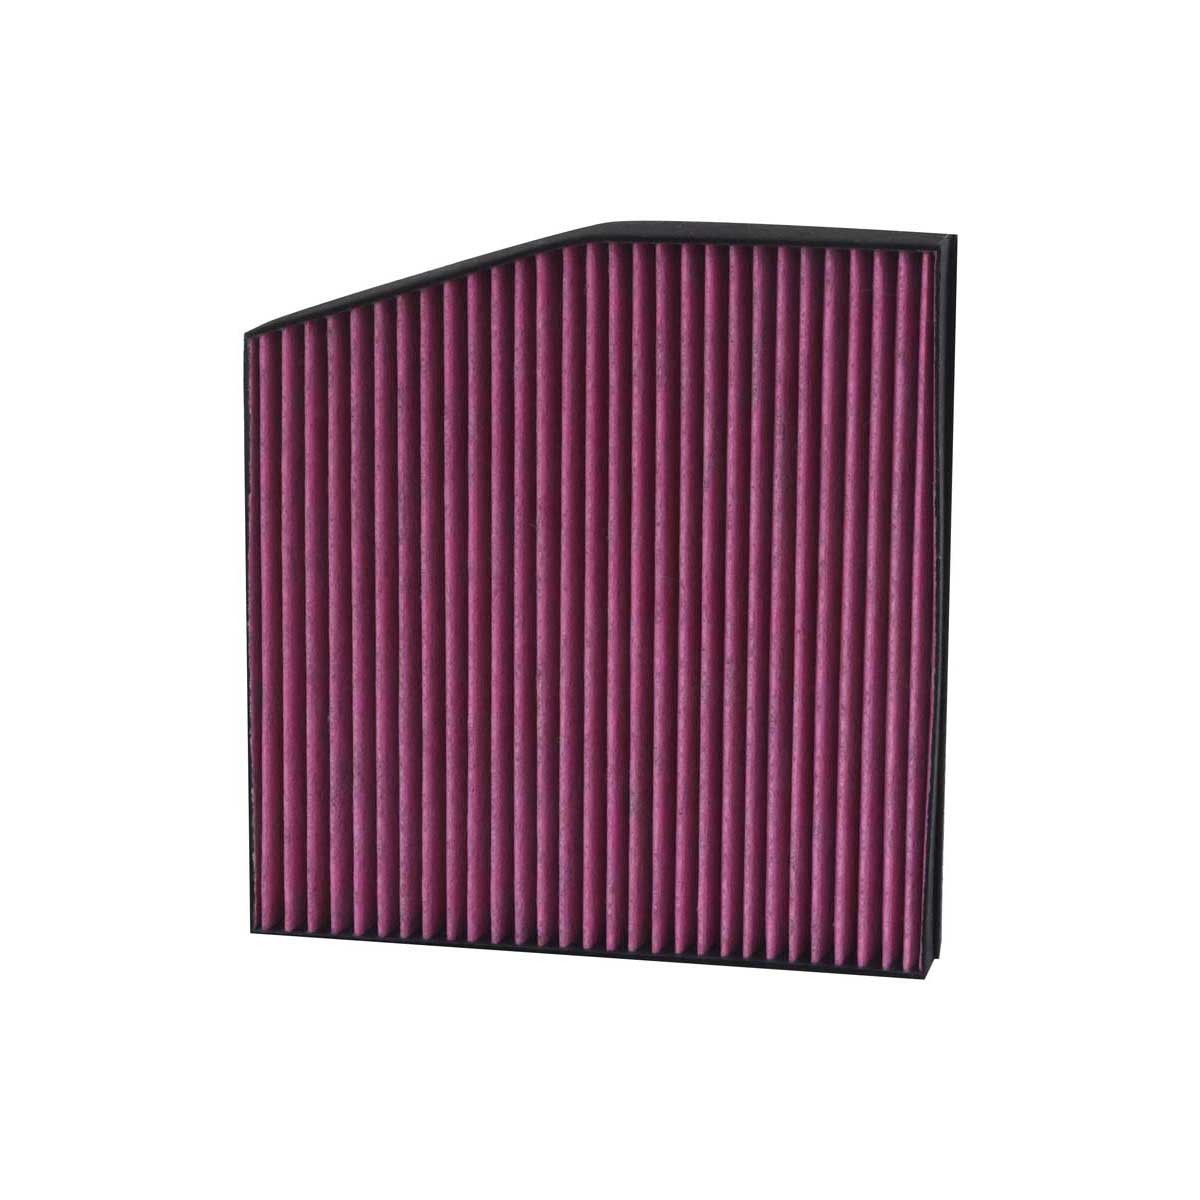 Original K&N Filters Air conditioner filter DVF5021 for FORD C-MAX